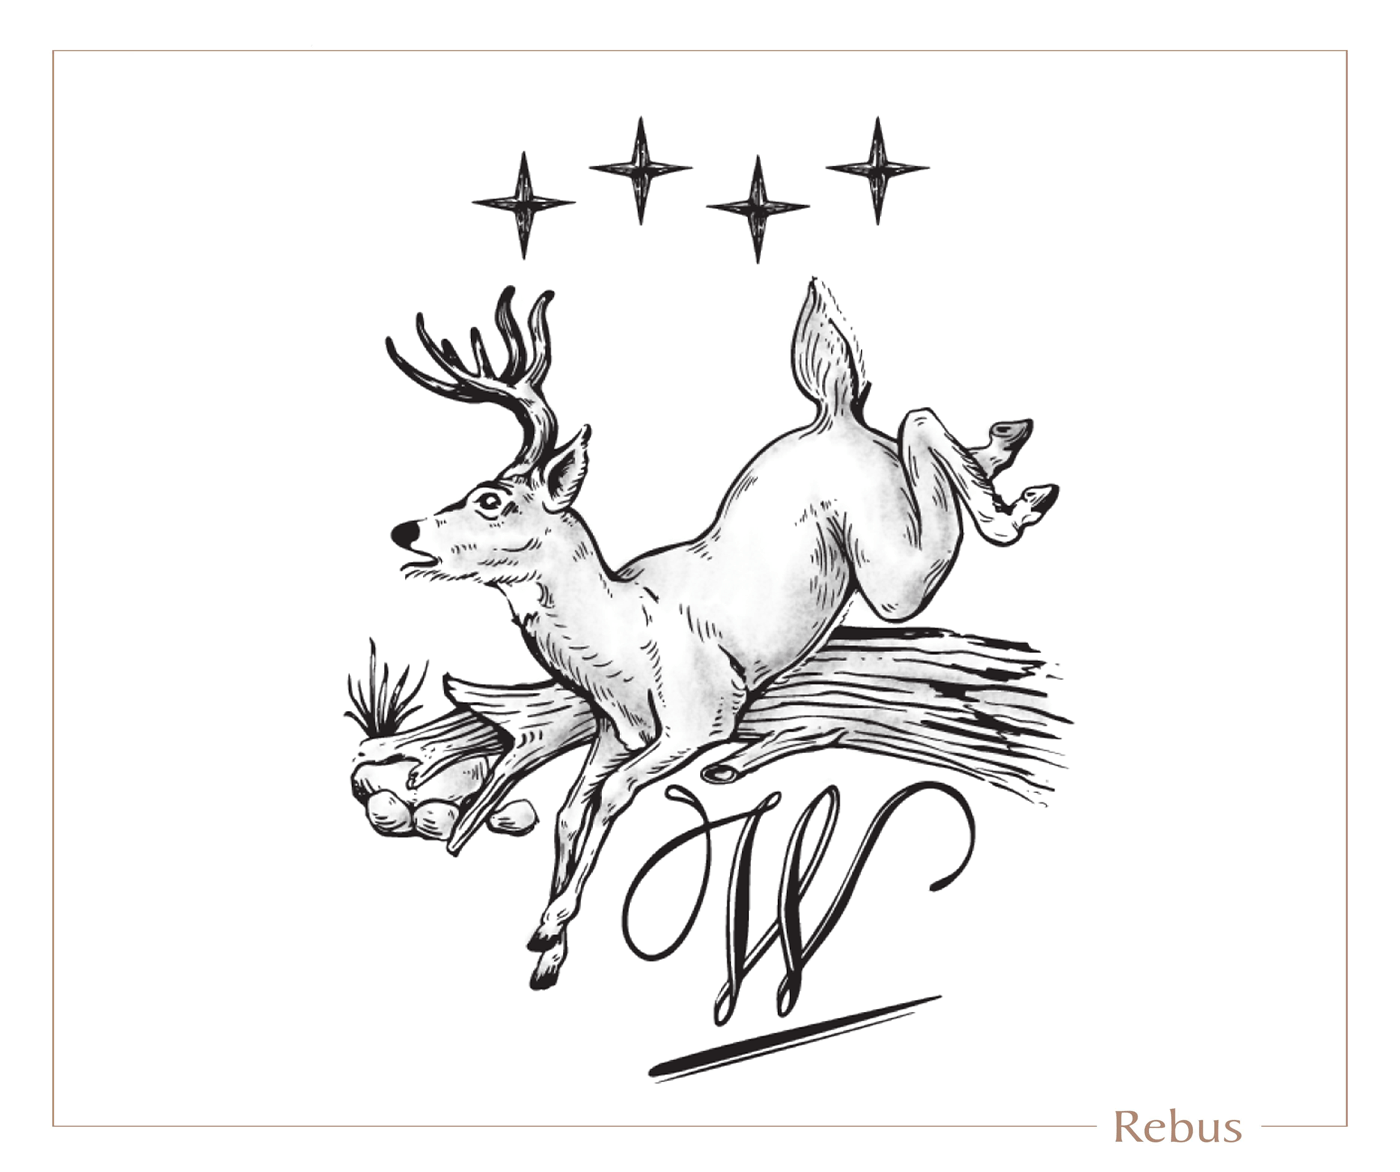 A Rebus illustration of a stag, four stars, and the client's surname initial in script